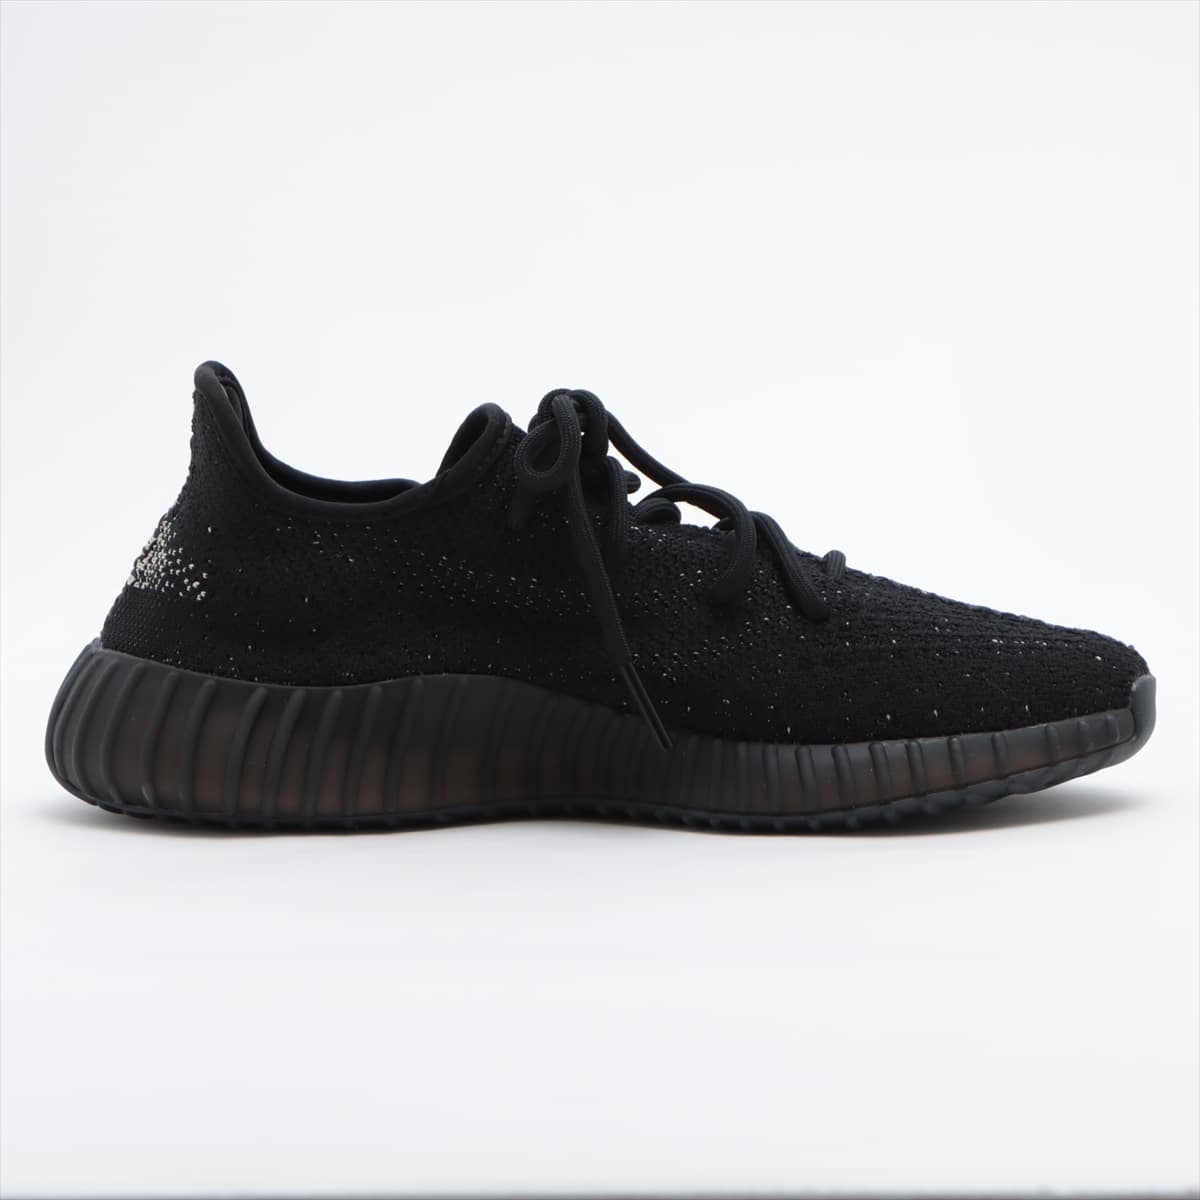 Adidas YEEZY BOOST 350 V2 Knit Sneakers 26㎝ Men's Black BY1604 OREO